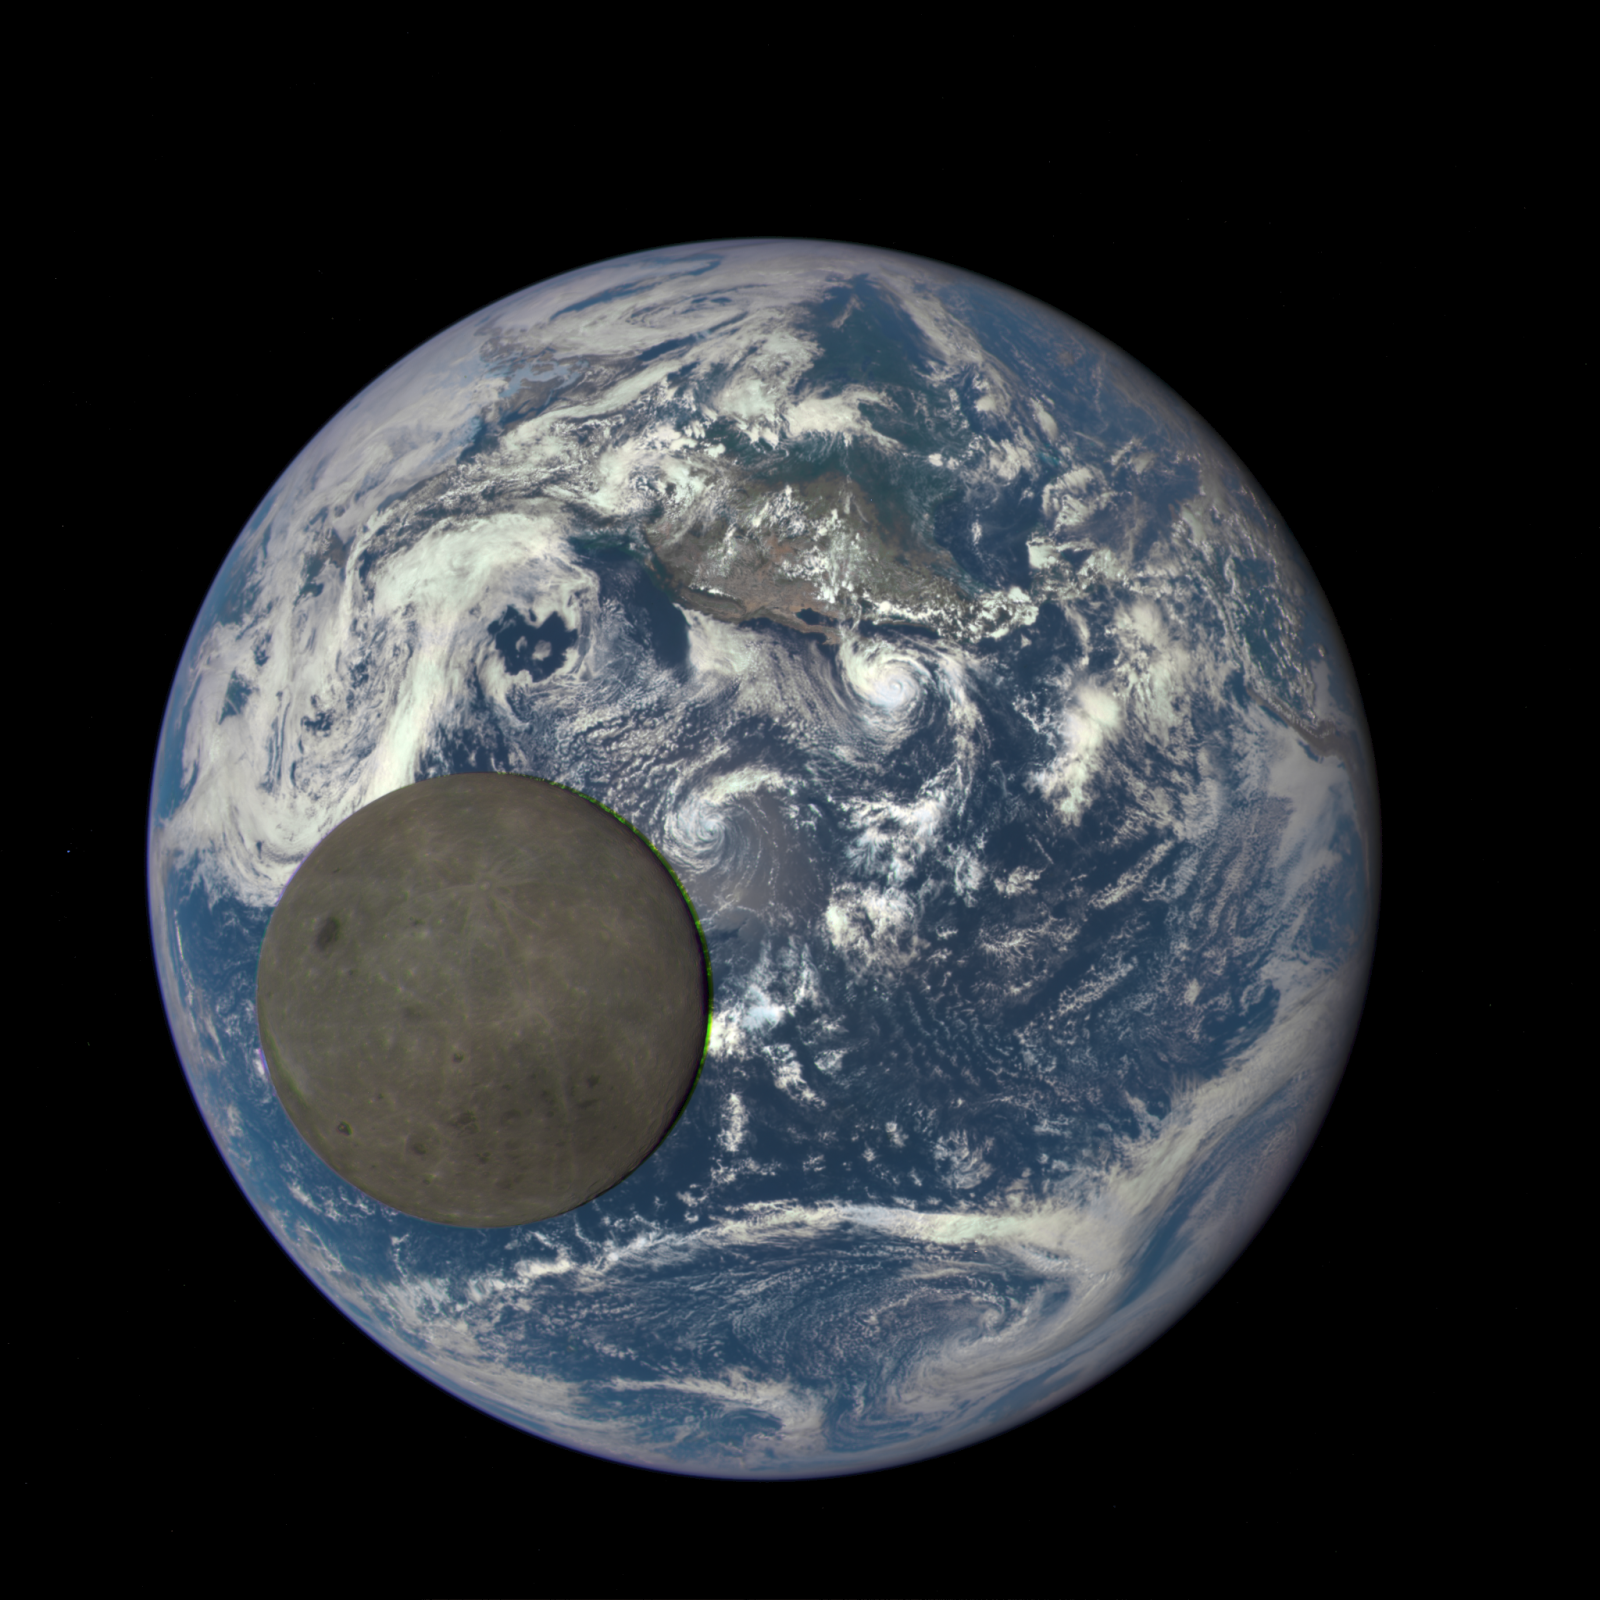 Weird picture shows dark side of the moon from Nasa's DSCOVR satellite